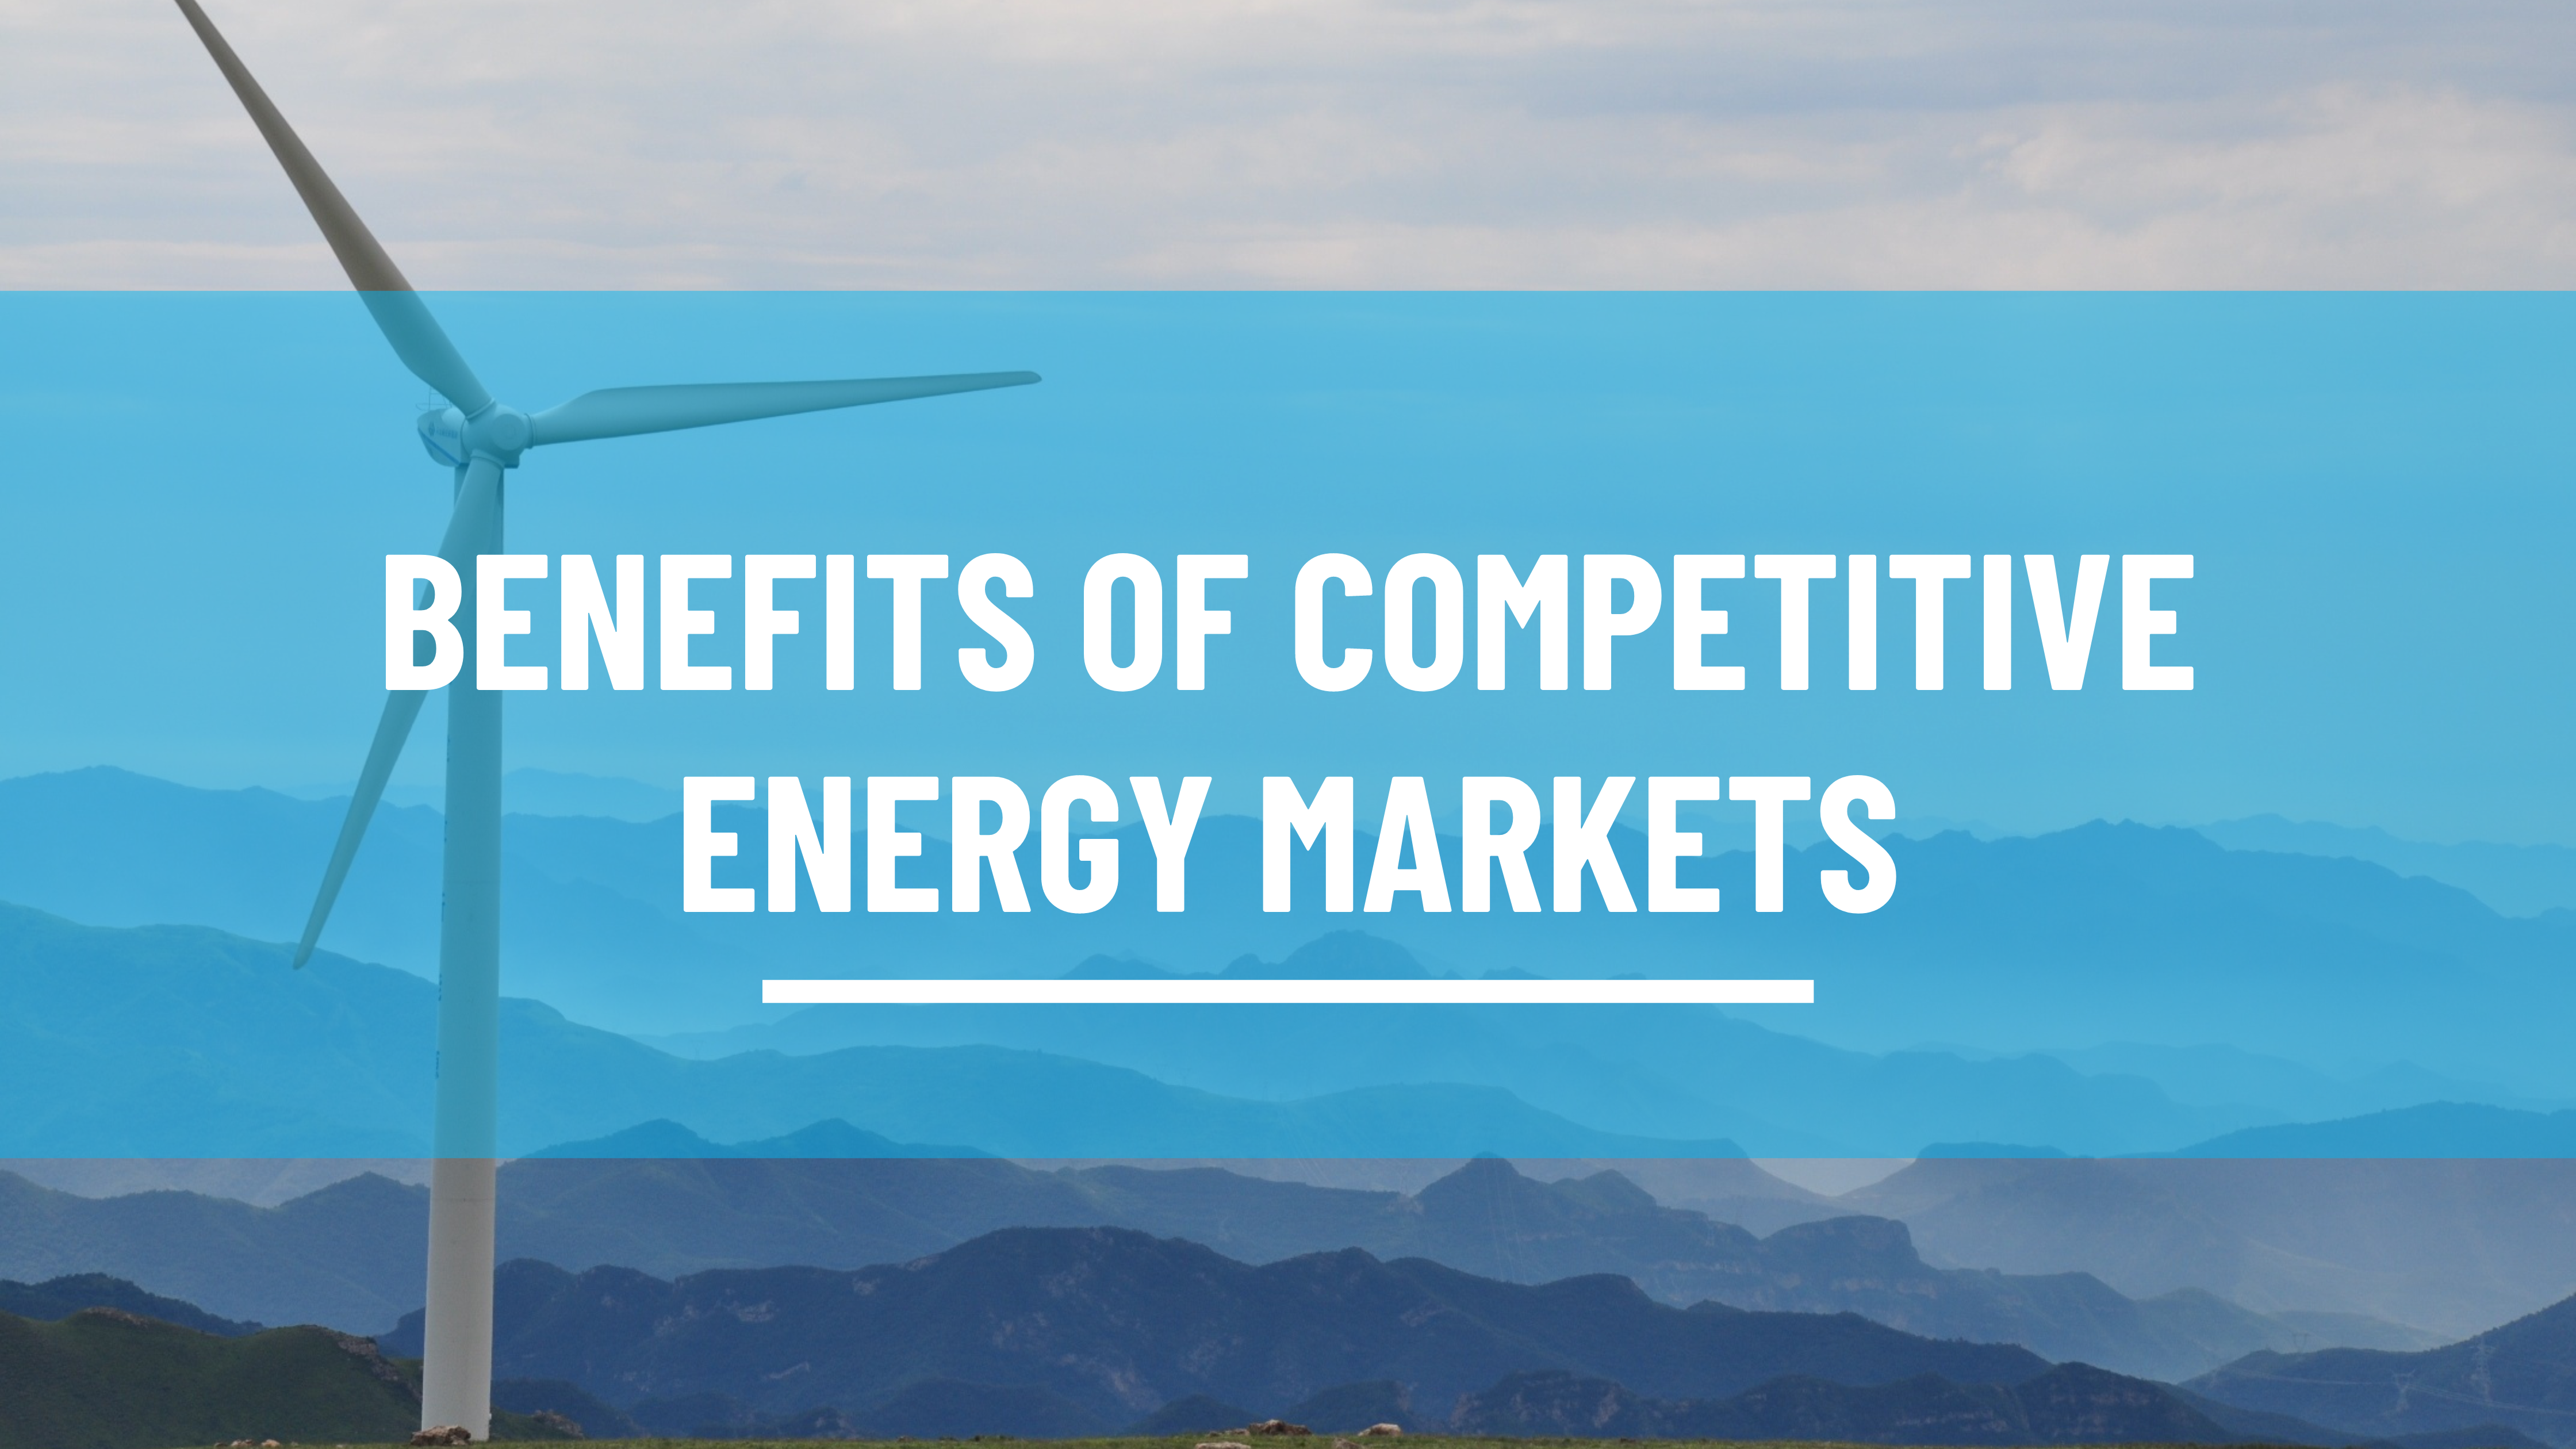 Benefits of competitive energy markets